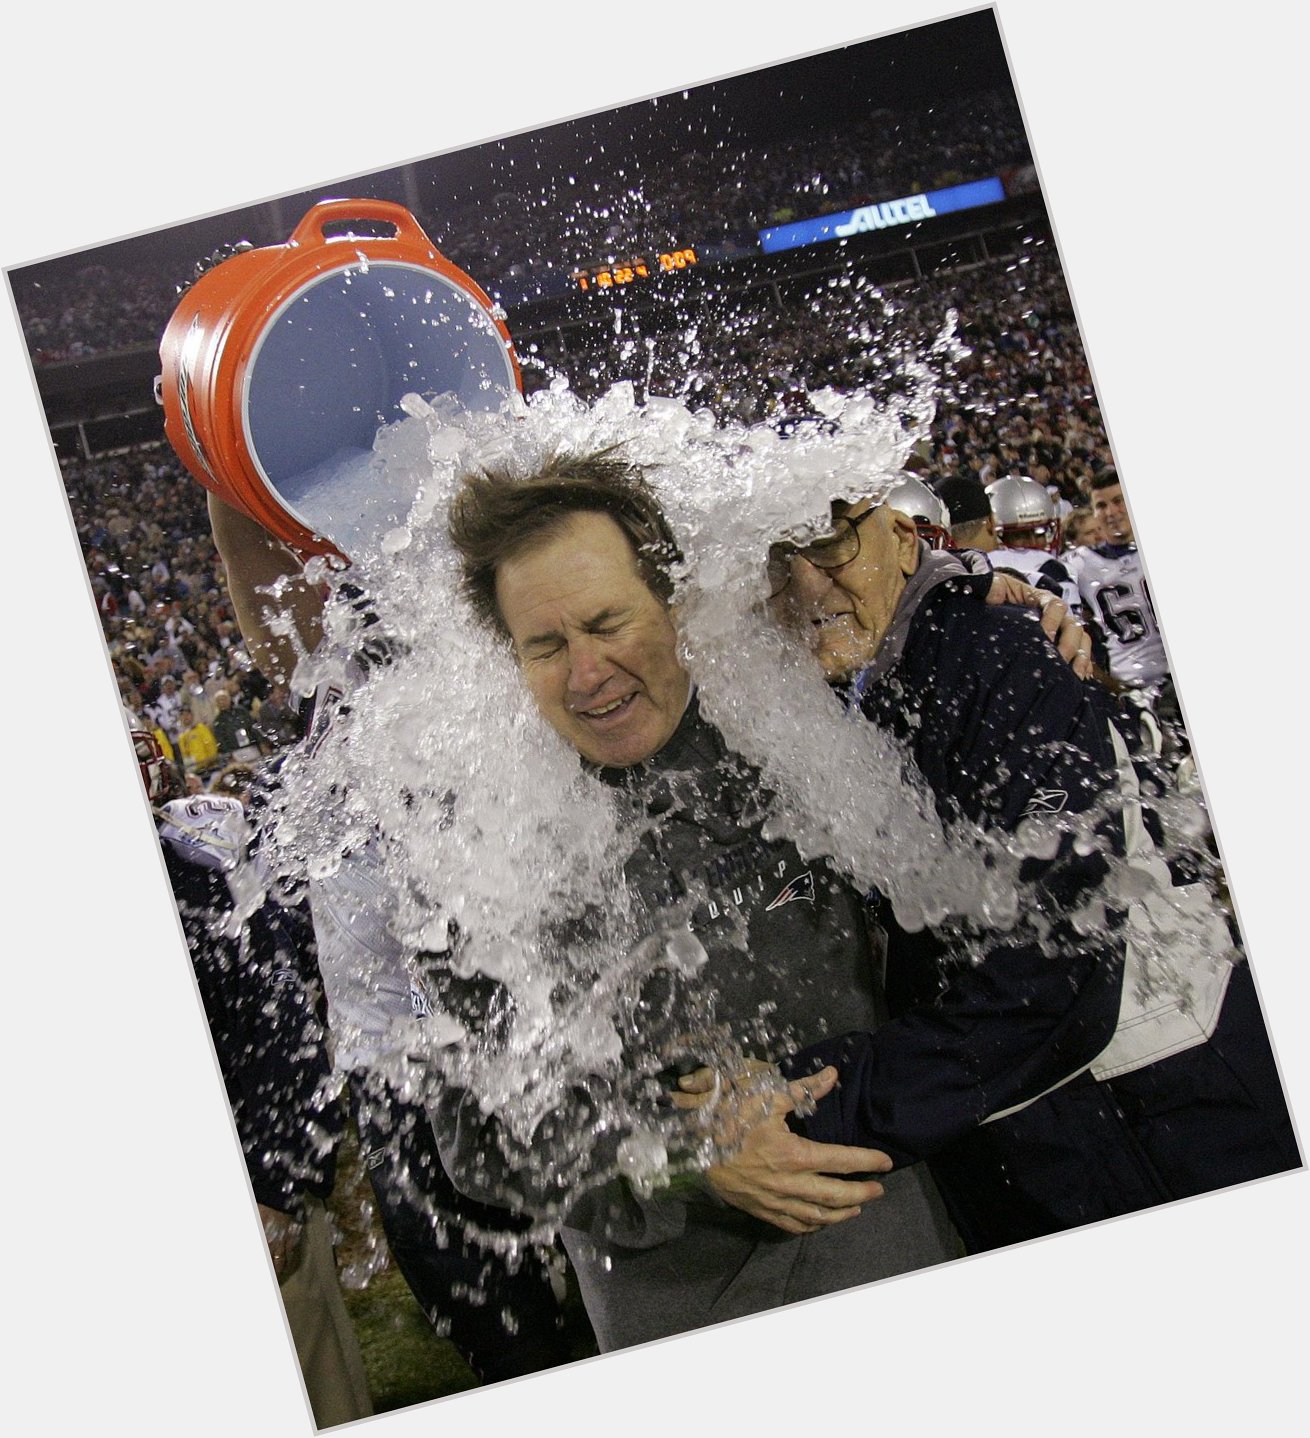   In honor of his birthday, some of our favorite Bill Belichick photos:  